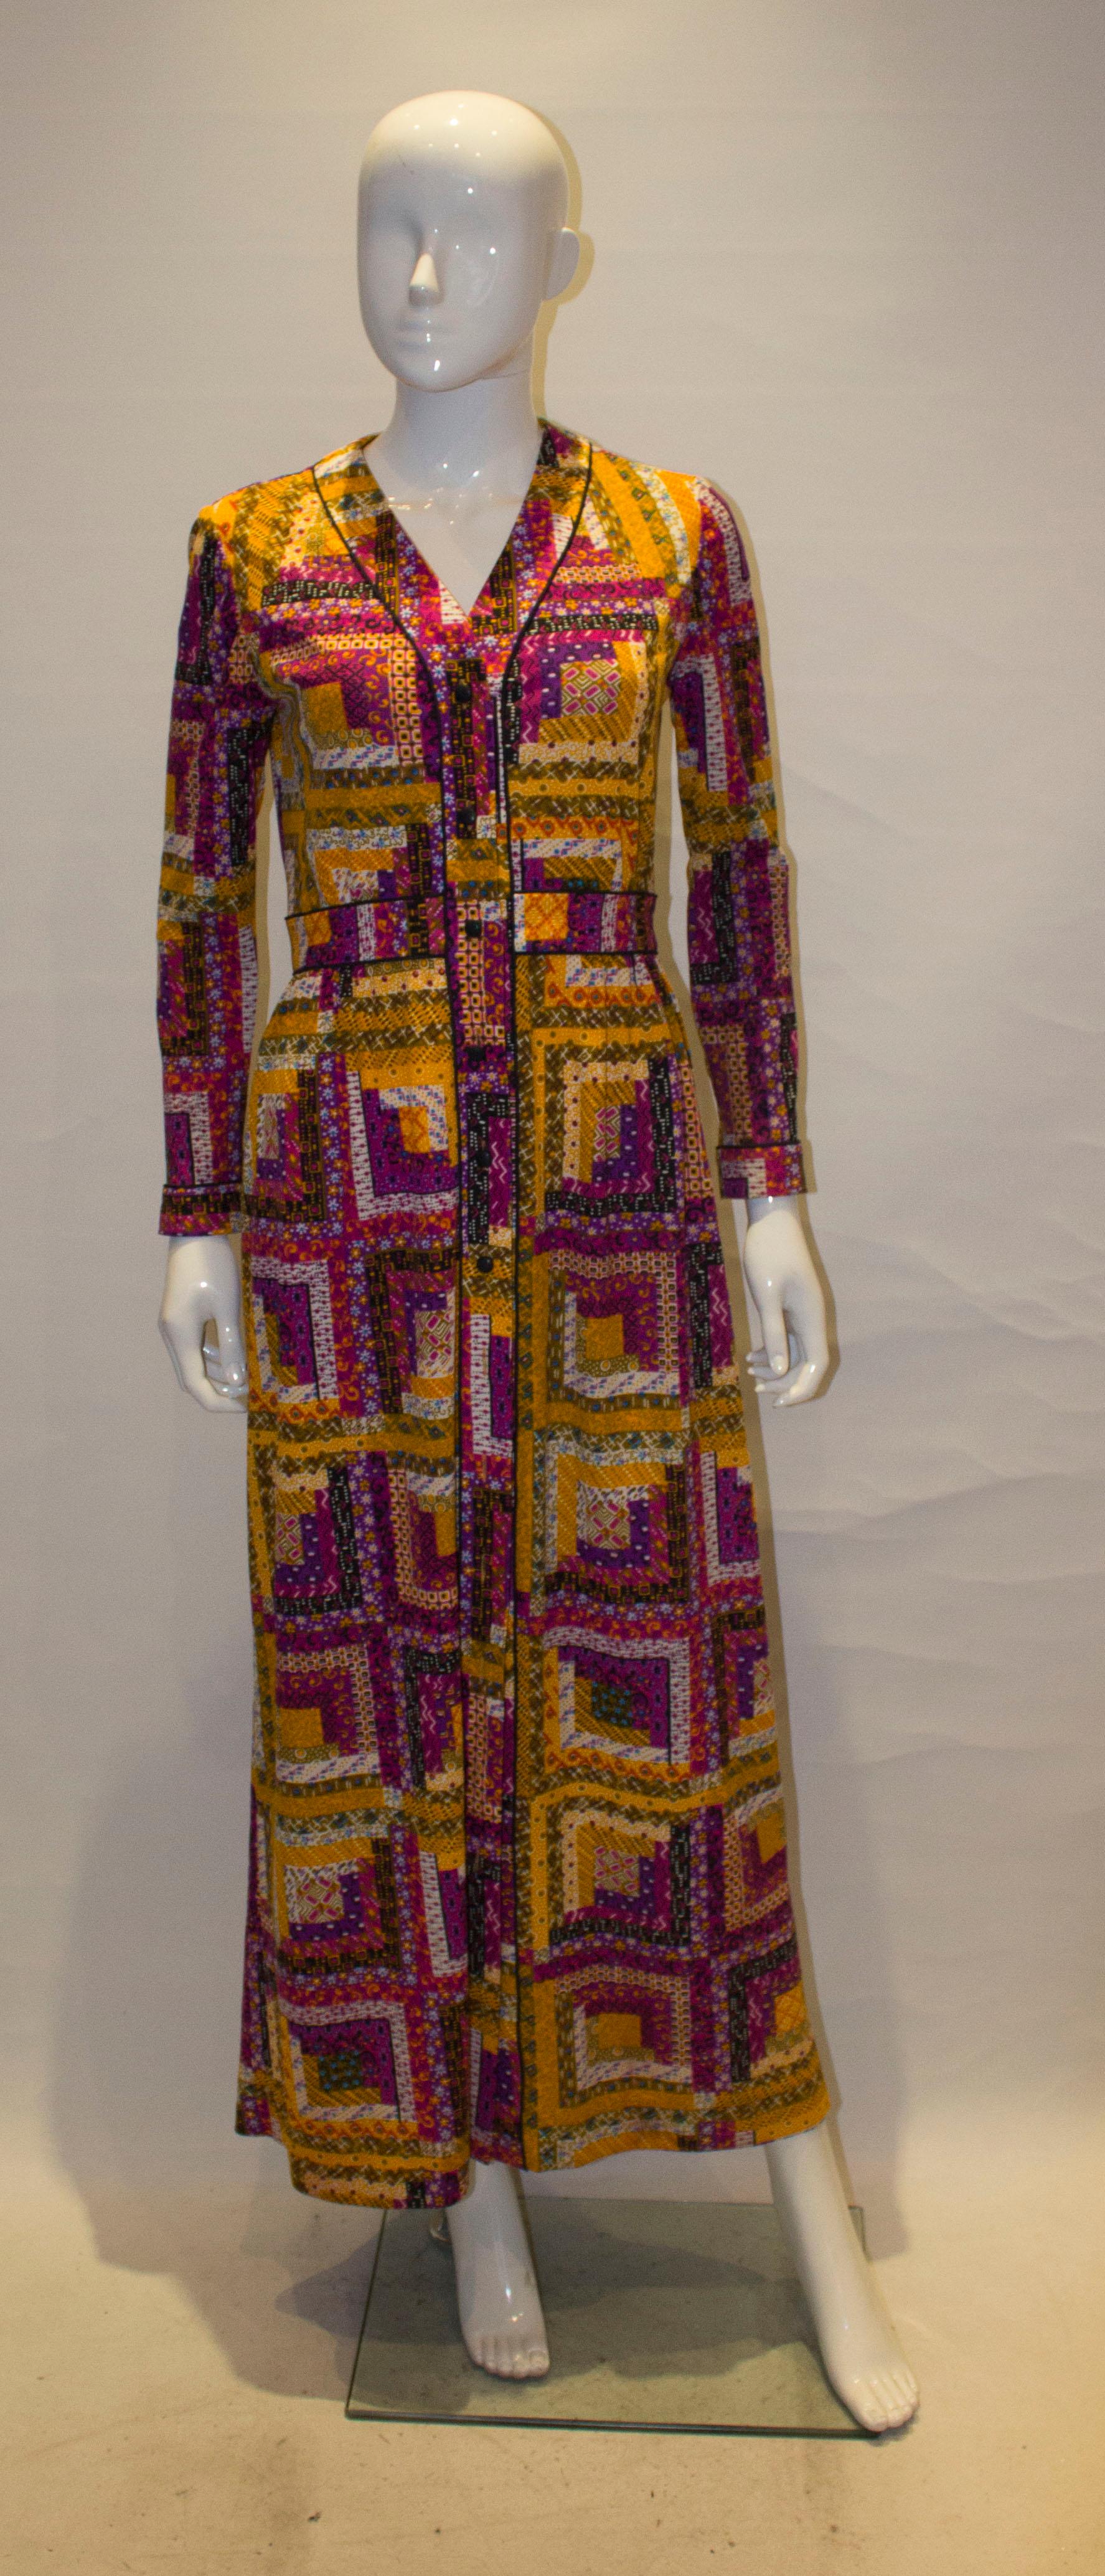 A chic , colourful gown by Fiorenza in shades of orange, purple and white. The dress has a  button through front opening with black trim,  a v neckline and gathering at the waist.